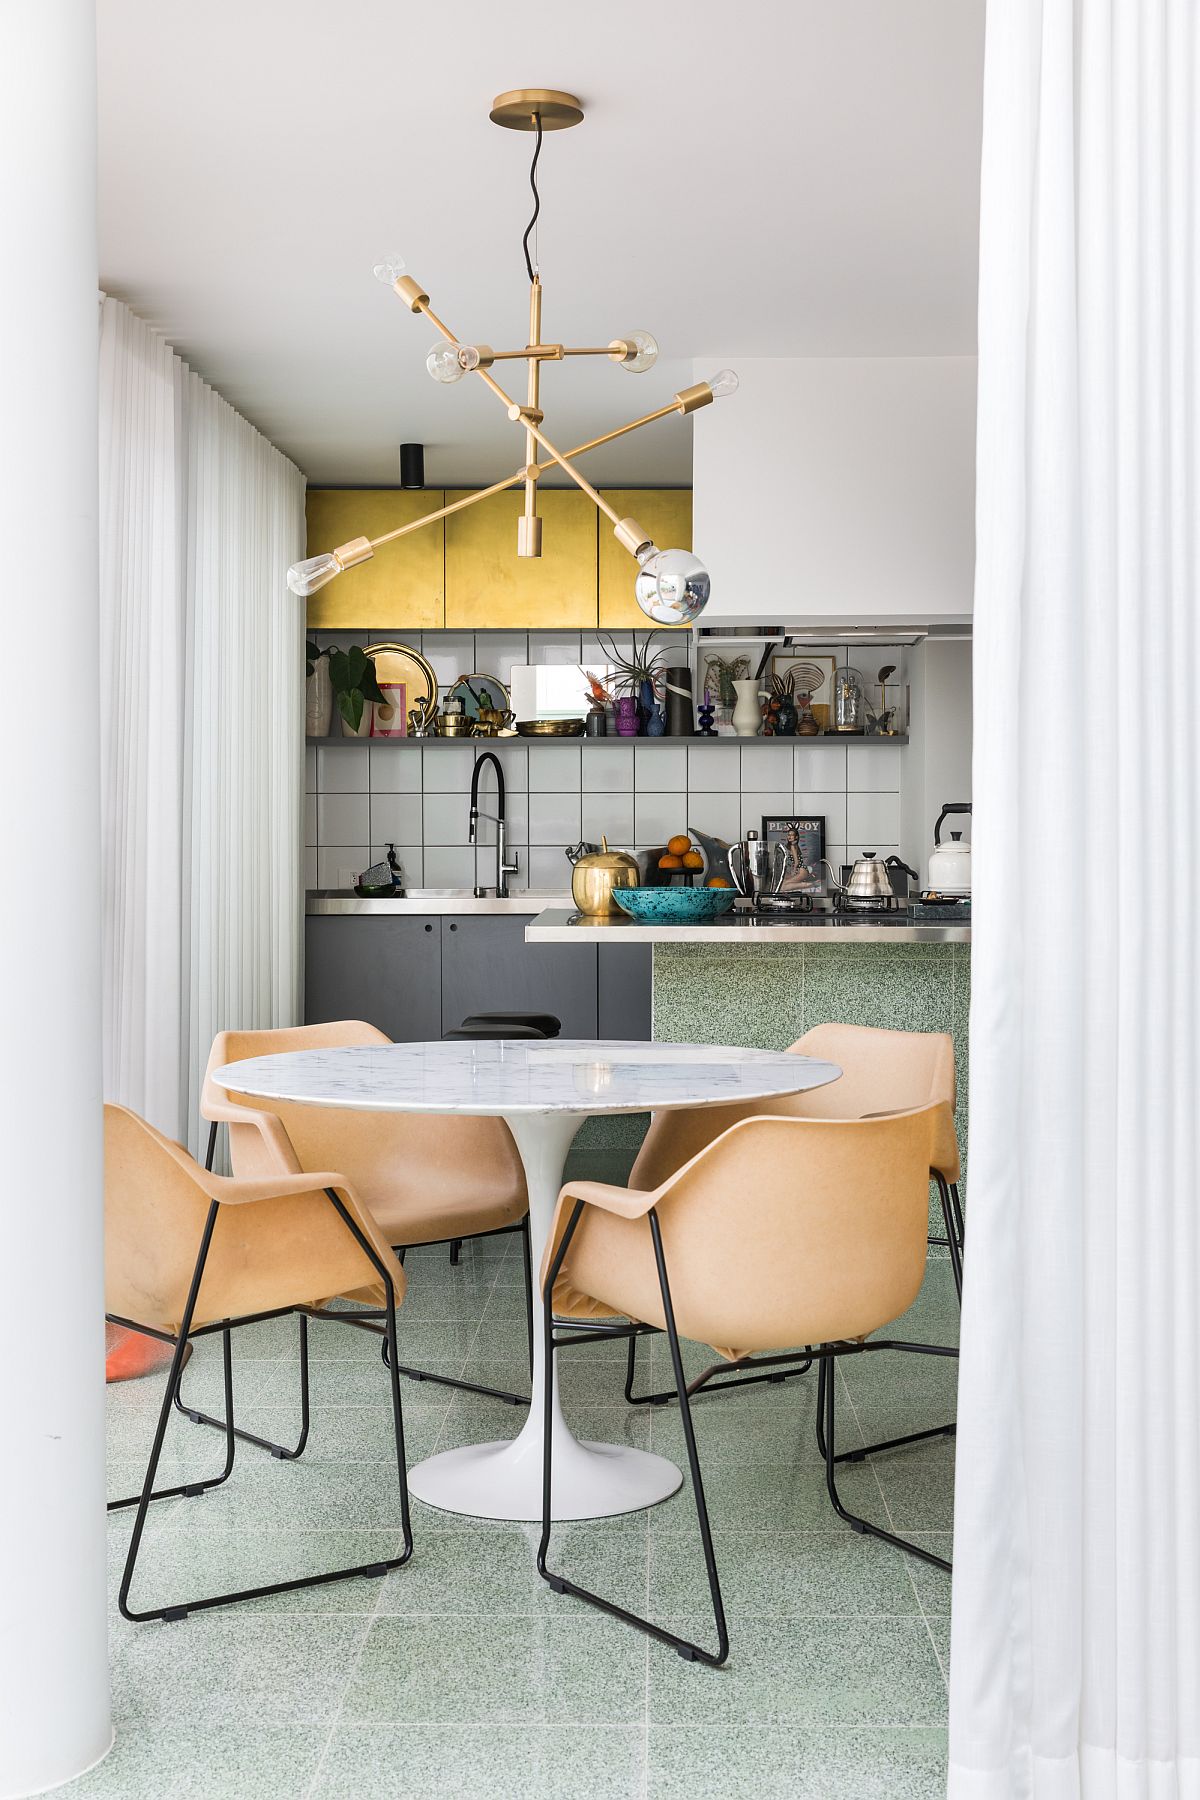 Stylish-Saarinen-Table-and-West-Elm-pendant-lighting-combined-to-create-a-glam-dining-area-28773